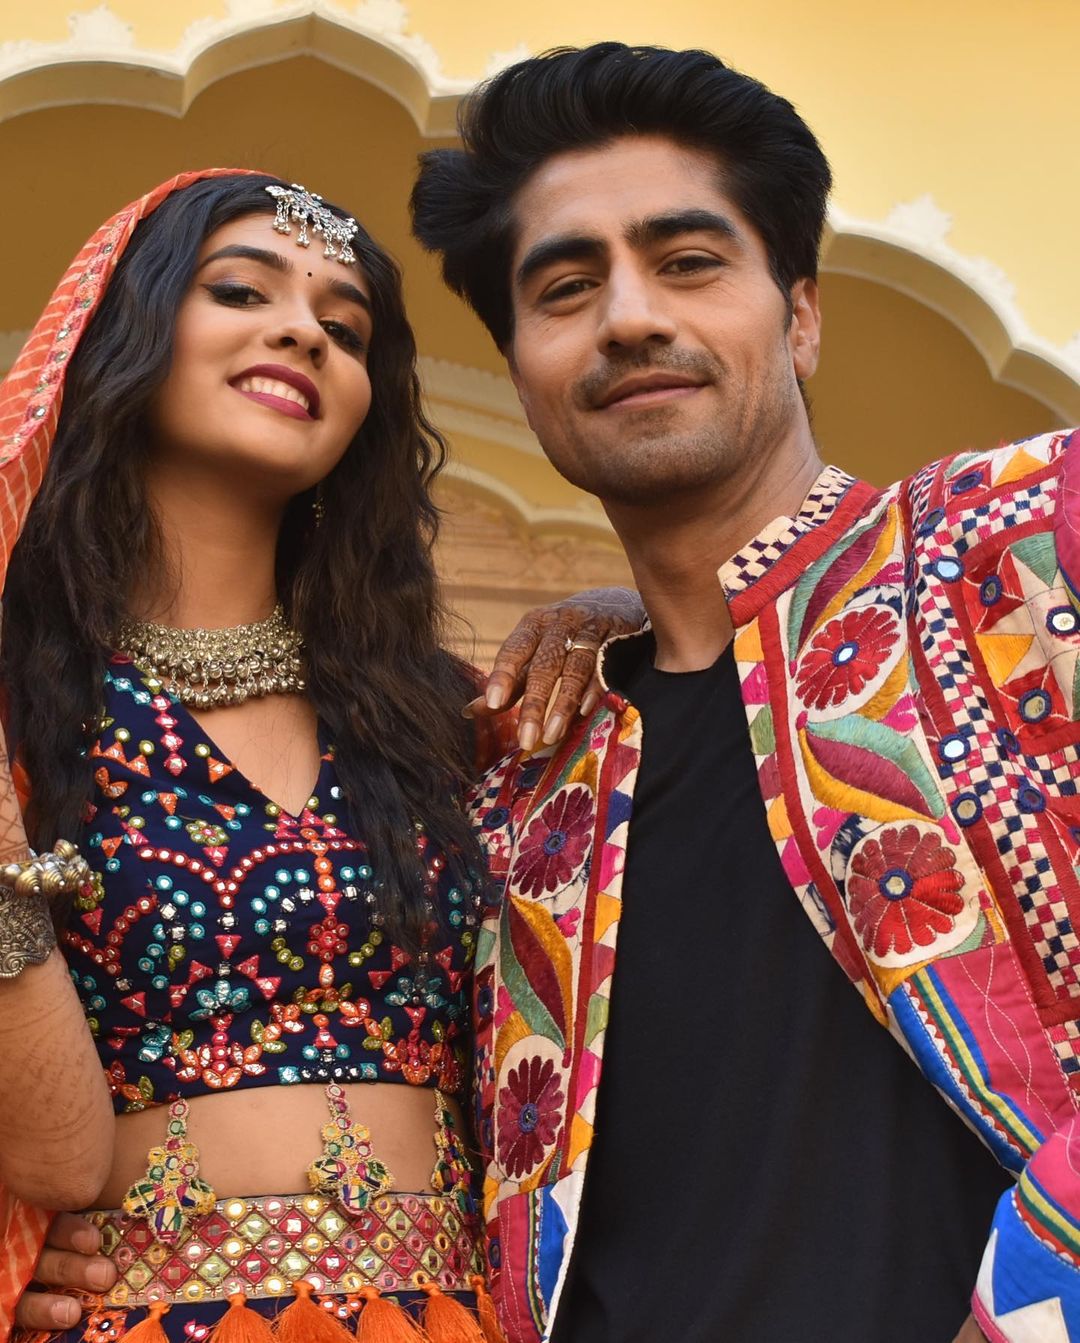 Harshad Chopda And Pranali Rathod Are The New Hottest Lovebirds In Town Here S What We Know